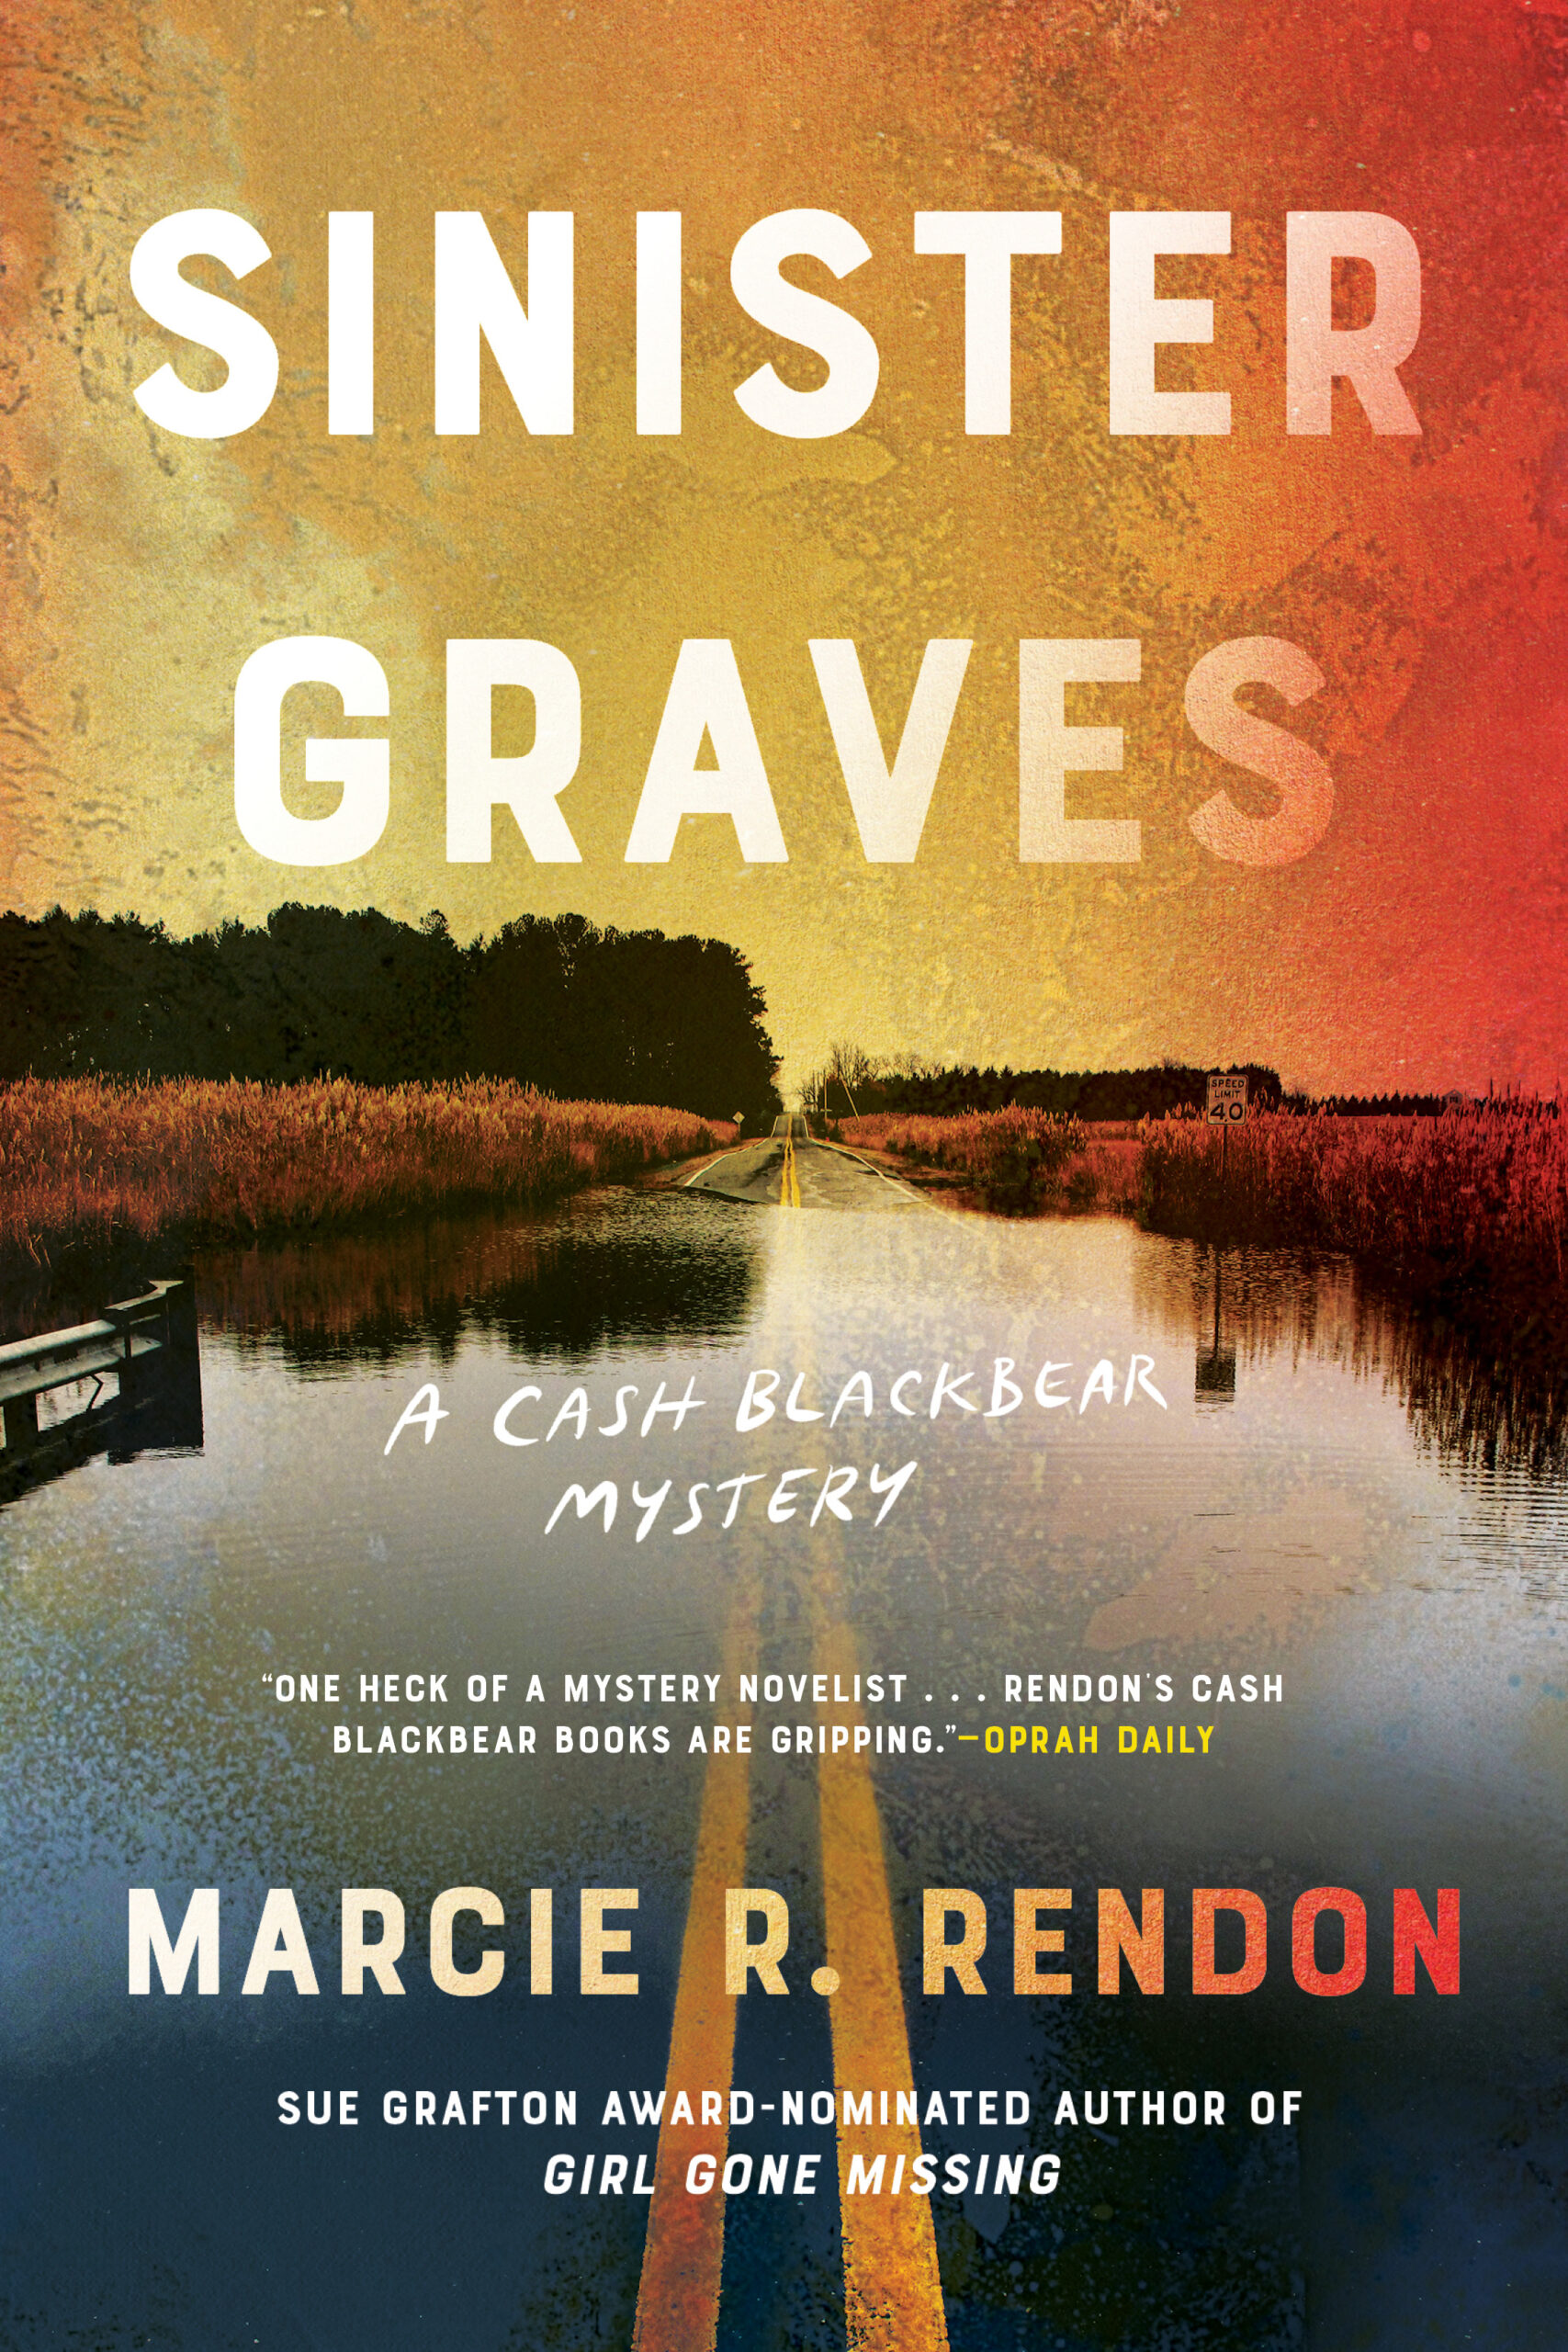 Sinister Graves by Marcie Rendon